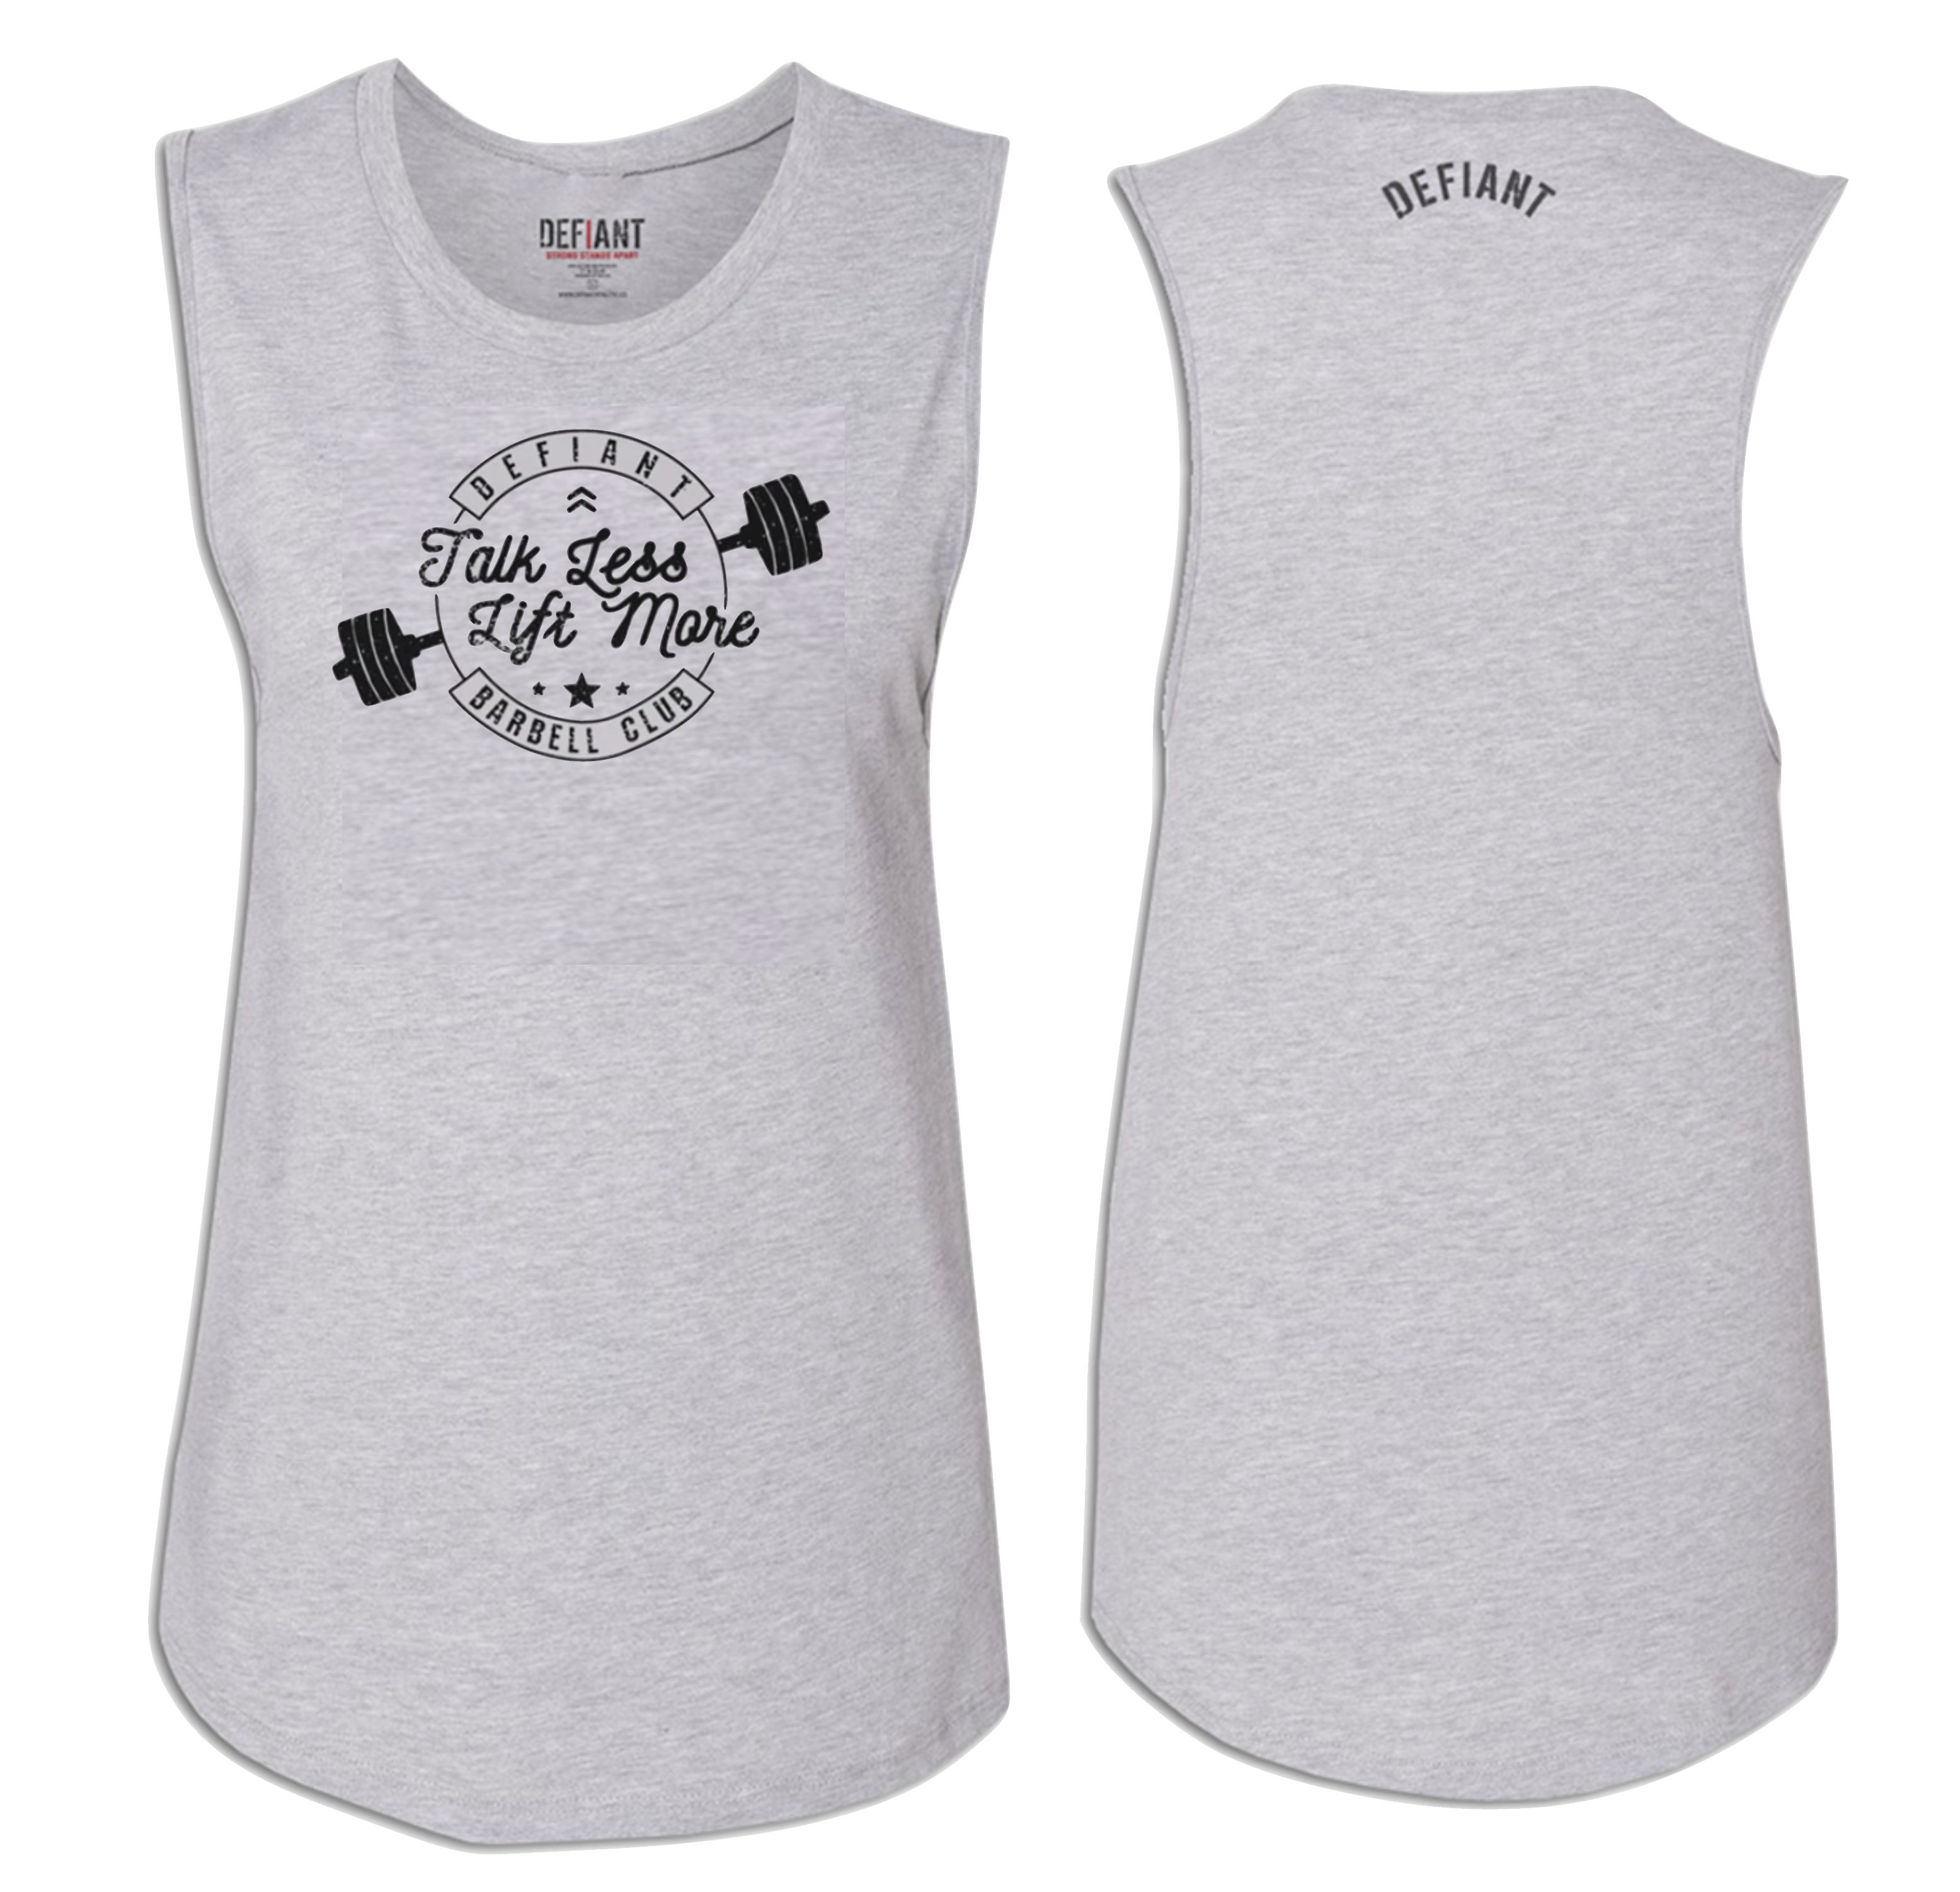 TALK LESS-LIFT MORE - THAT'S WHAT WE DO! - Women's Muscle Tank